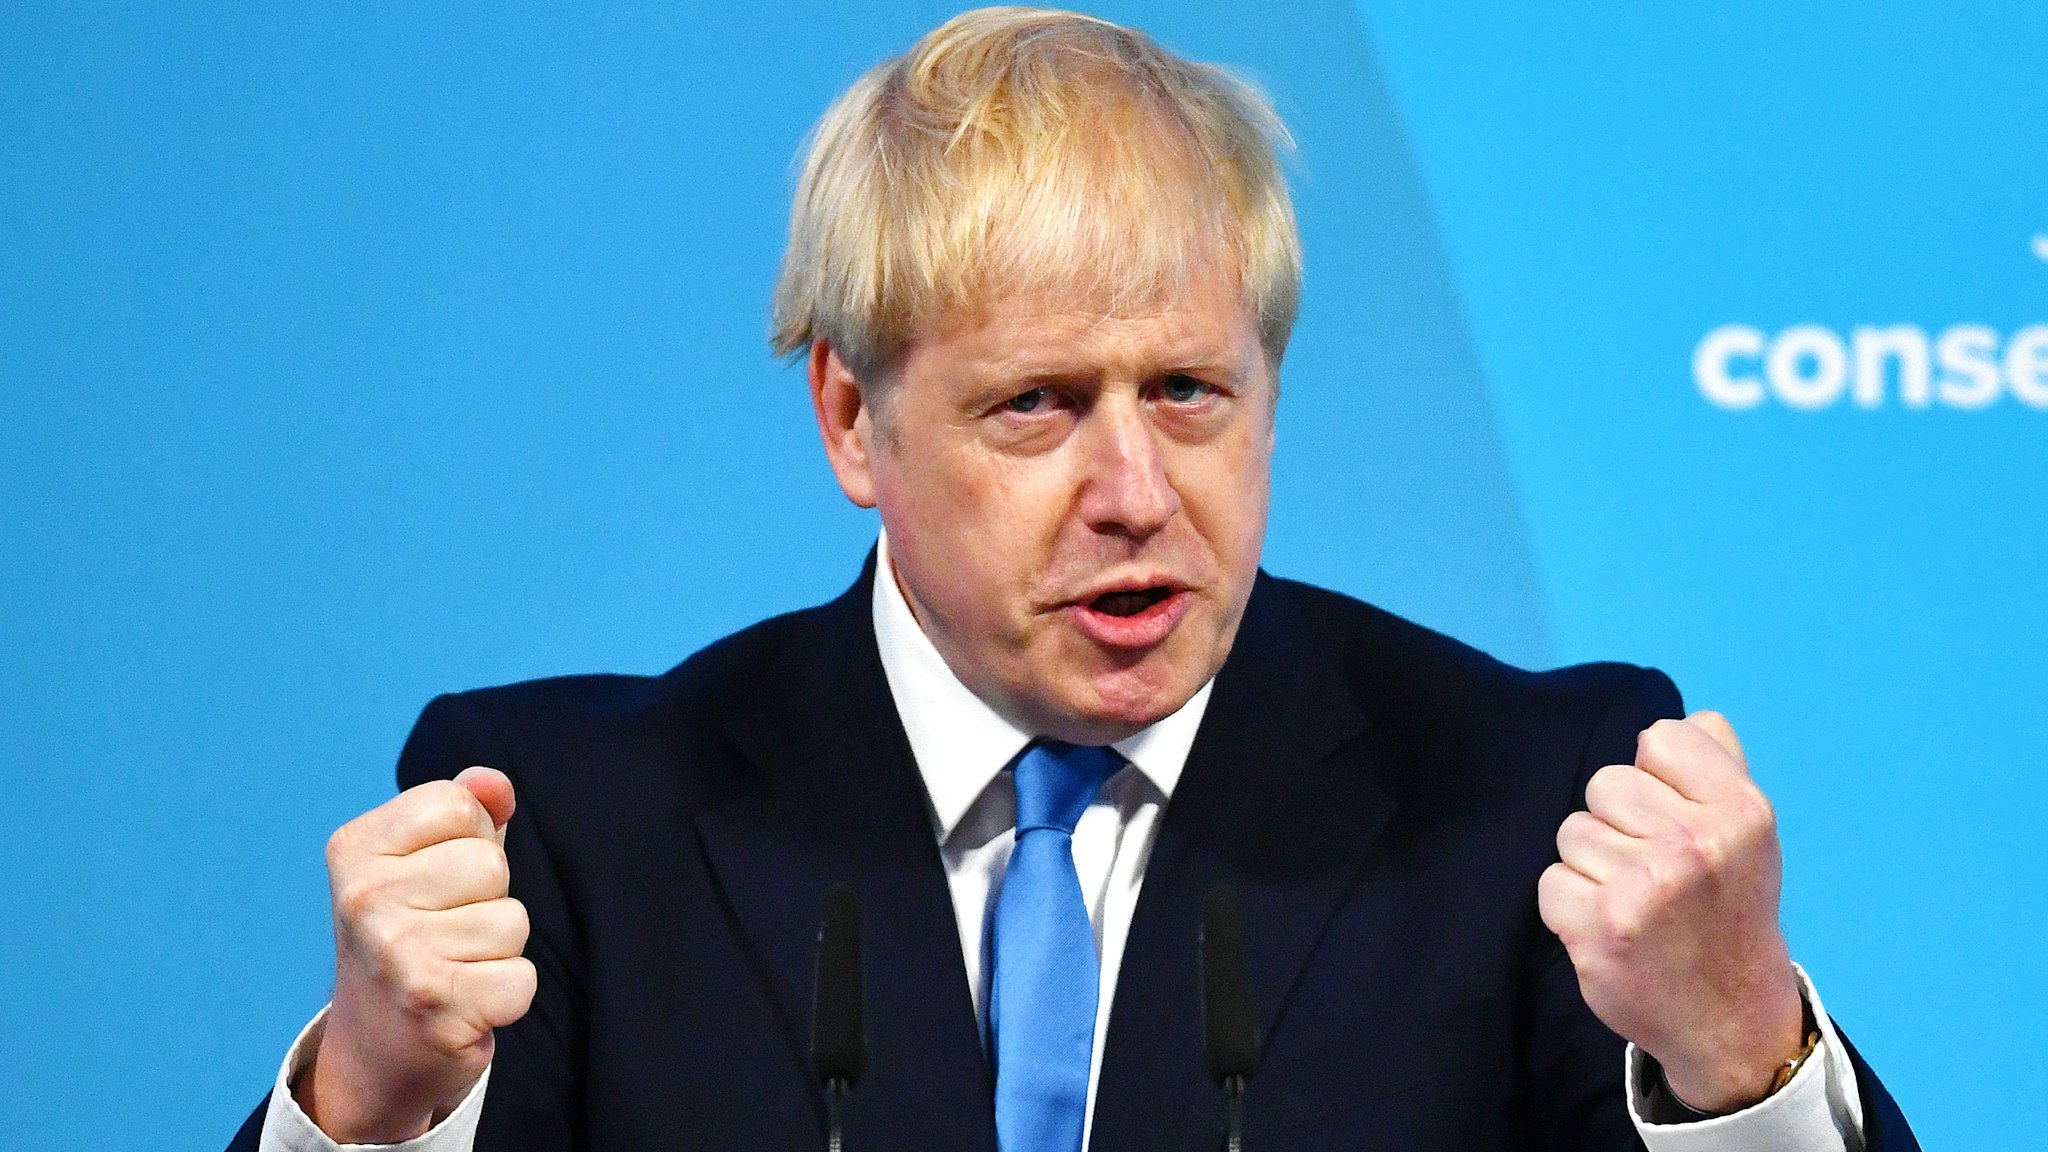 Newly elected British Prime Minister Boris Johnson speaks during the Conservative Leadership announcement at the QEII Centre on July 23, 2019 in London, England. After a month of hustings, campaigning and televised debates the members of the UK's Conservative and Unionist Party have voted for Boris Johnson to be their new leader and the country's next Prime Minister, replacing Theresa May.